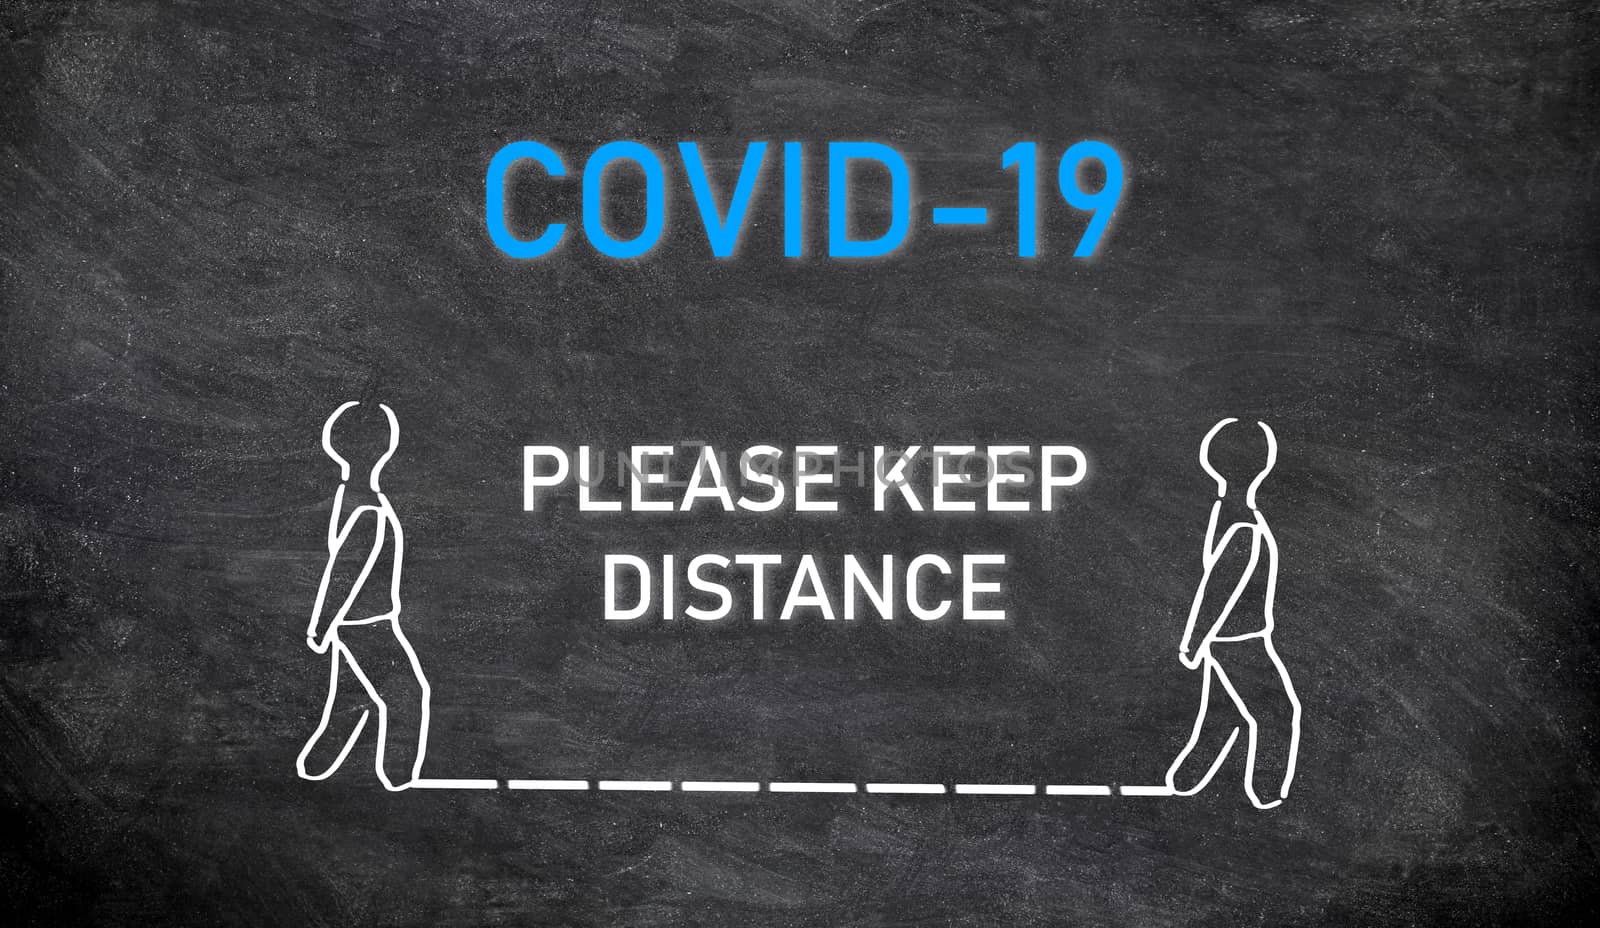 COVID-19 SOCIAL DISTANCING public announcement message board Please Keep distance of two meters or 6 feet between each person walking on street or waiting in line at store or hospital by Maridav